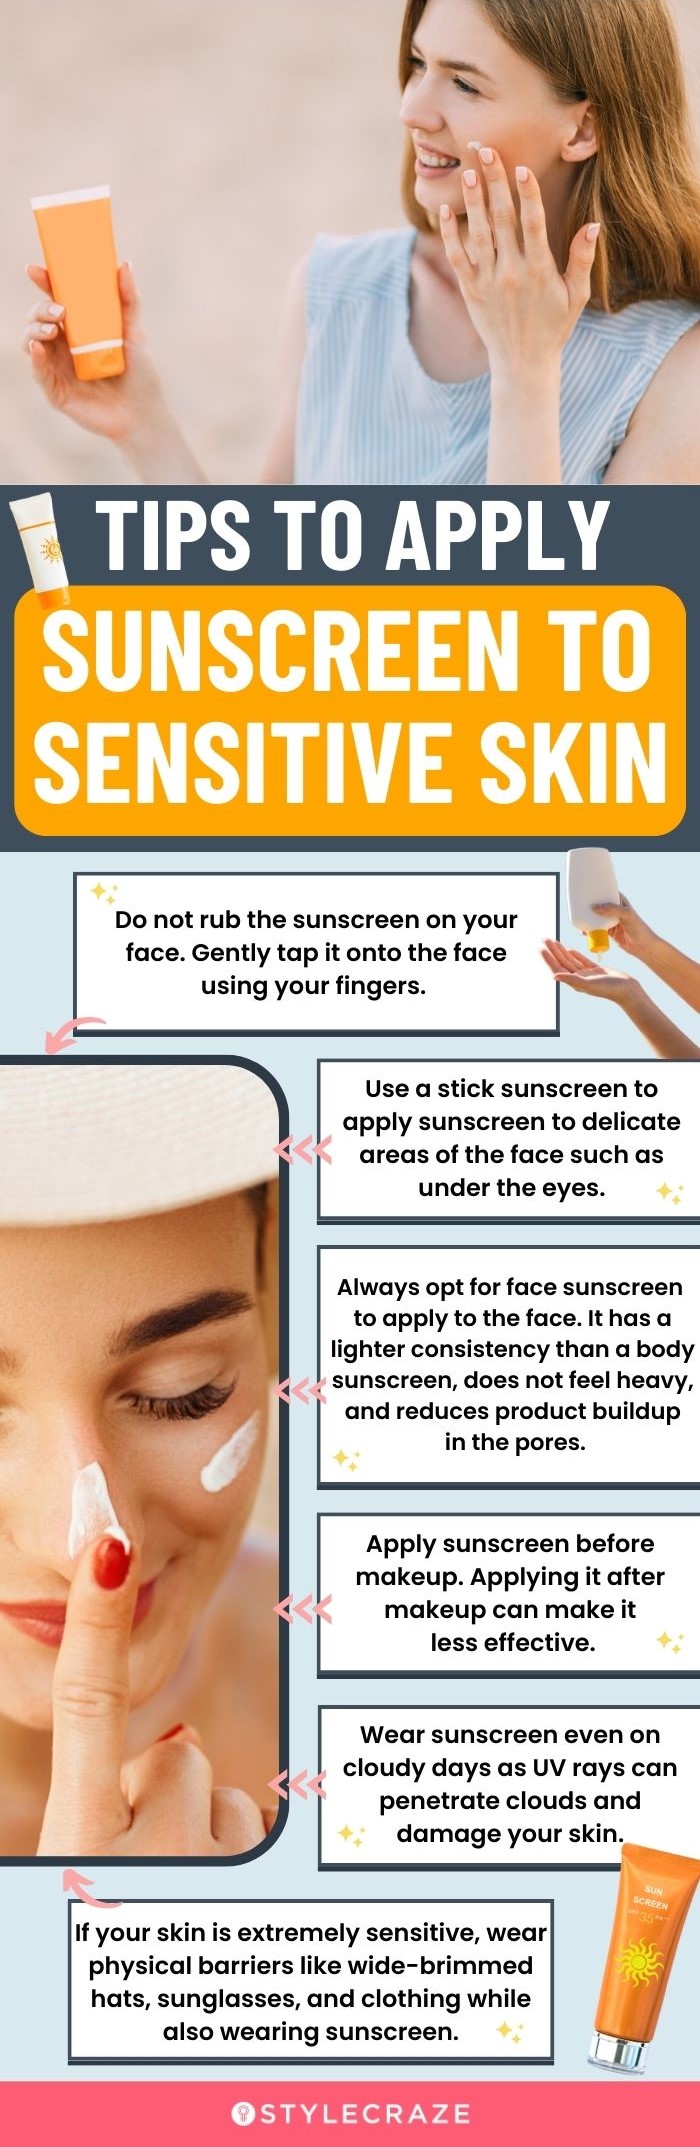  Tips To Apply Sunscreen To Sensitive Skin (infographic)